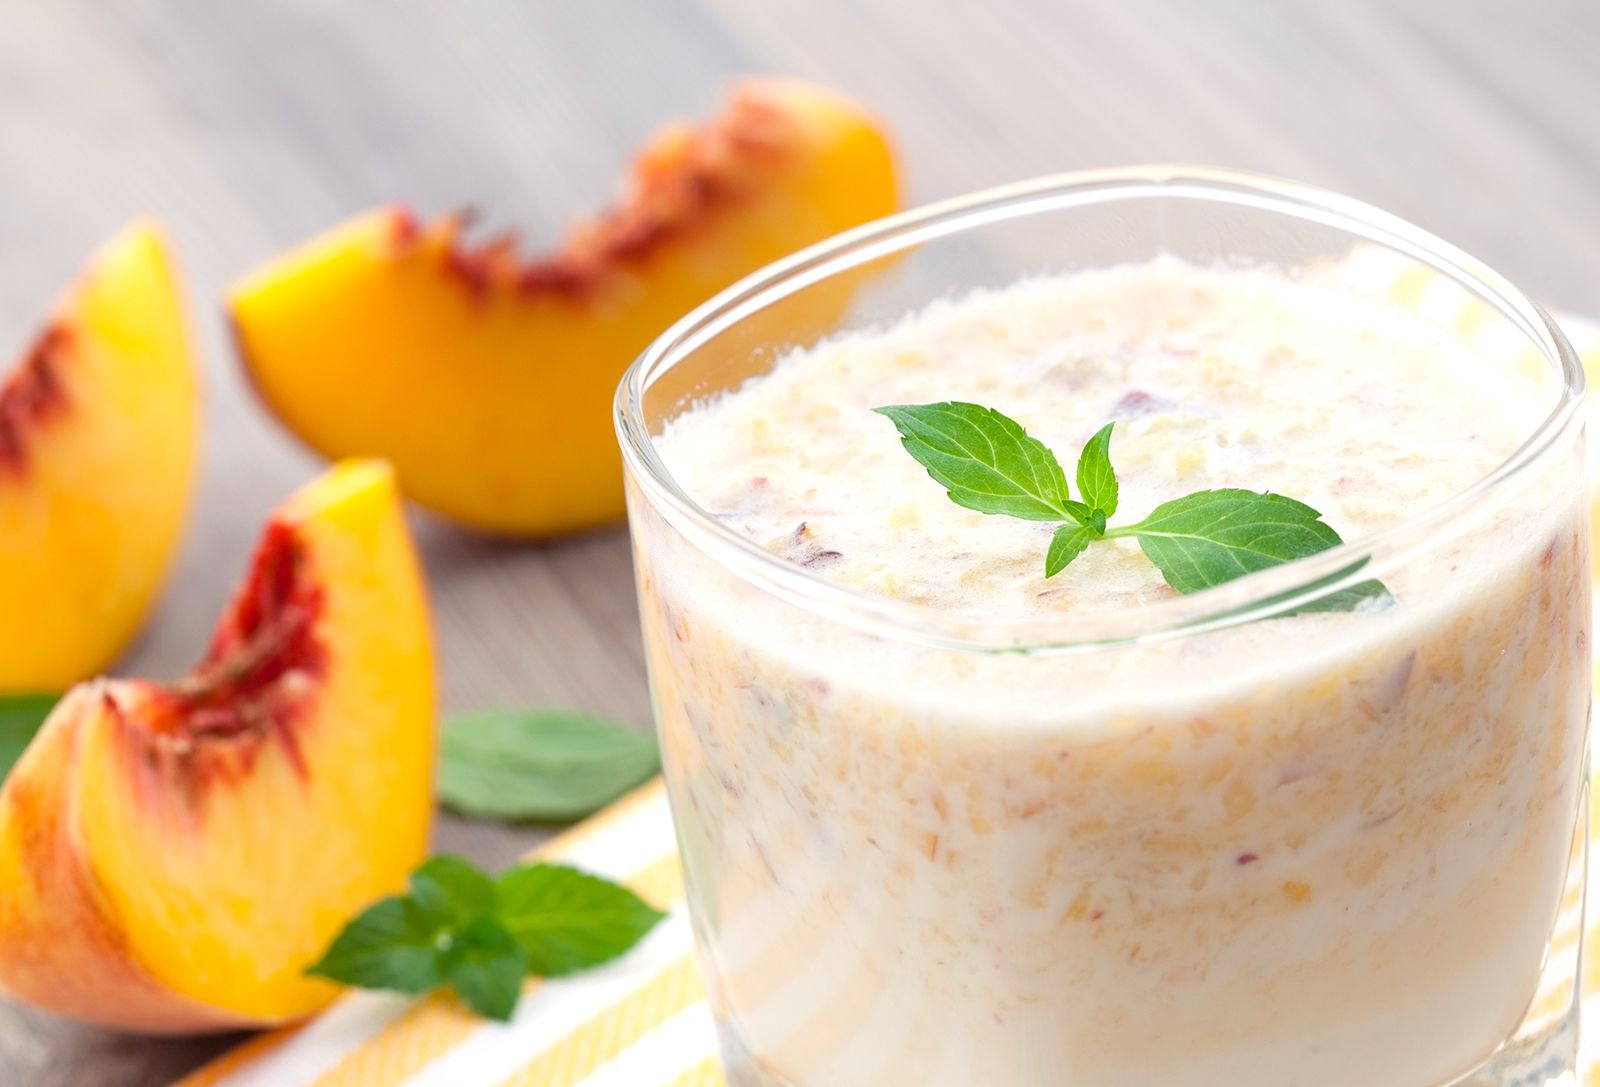 Central City - Make this month extra peachy with Booster Juice Peach  Crumble smoothie, handcrafted with peach, pineapples, mangos, vanilla  frozen yogurt, skim milk and a dash of cinnamon. This new tasty